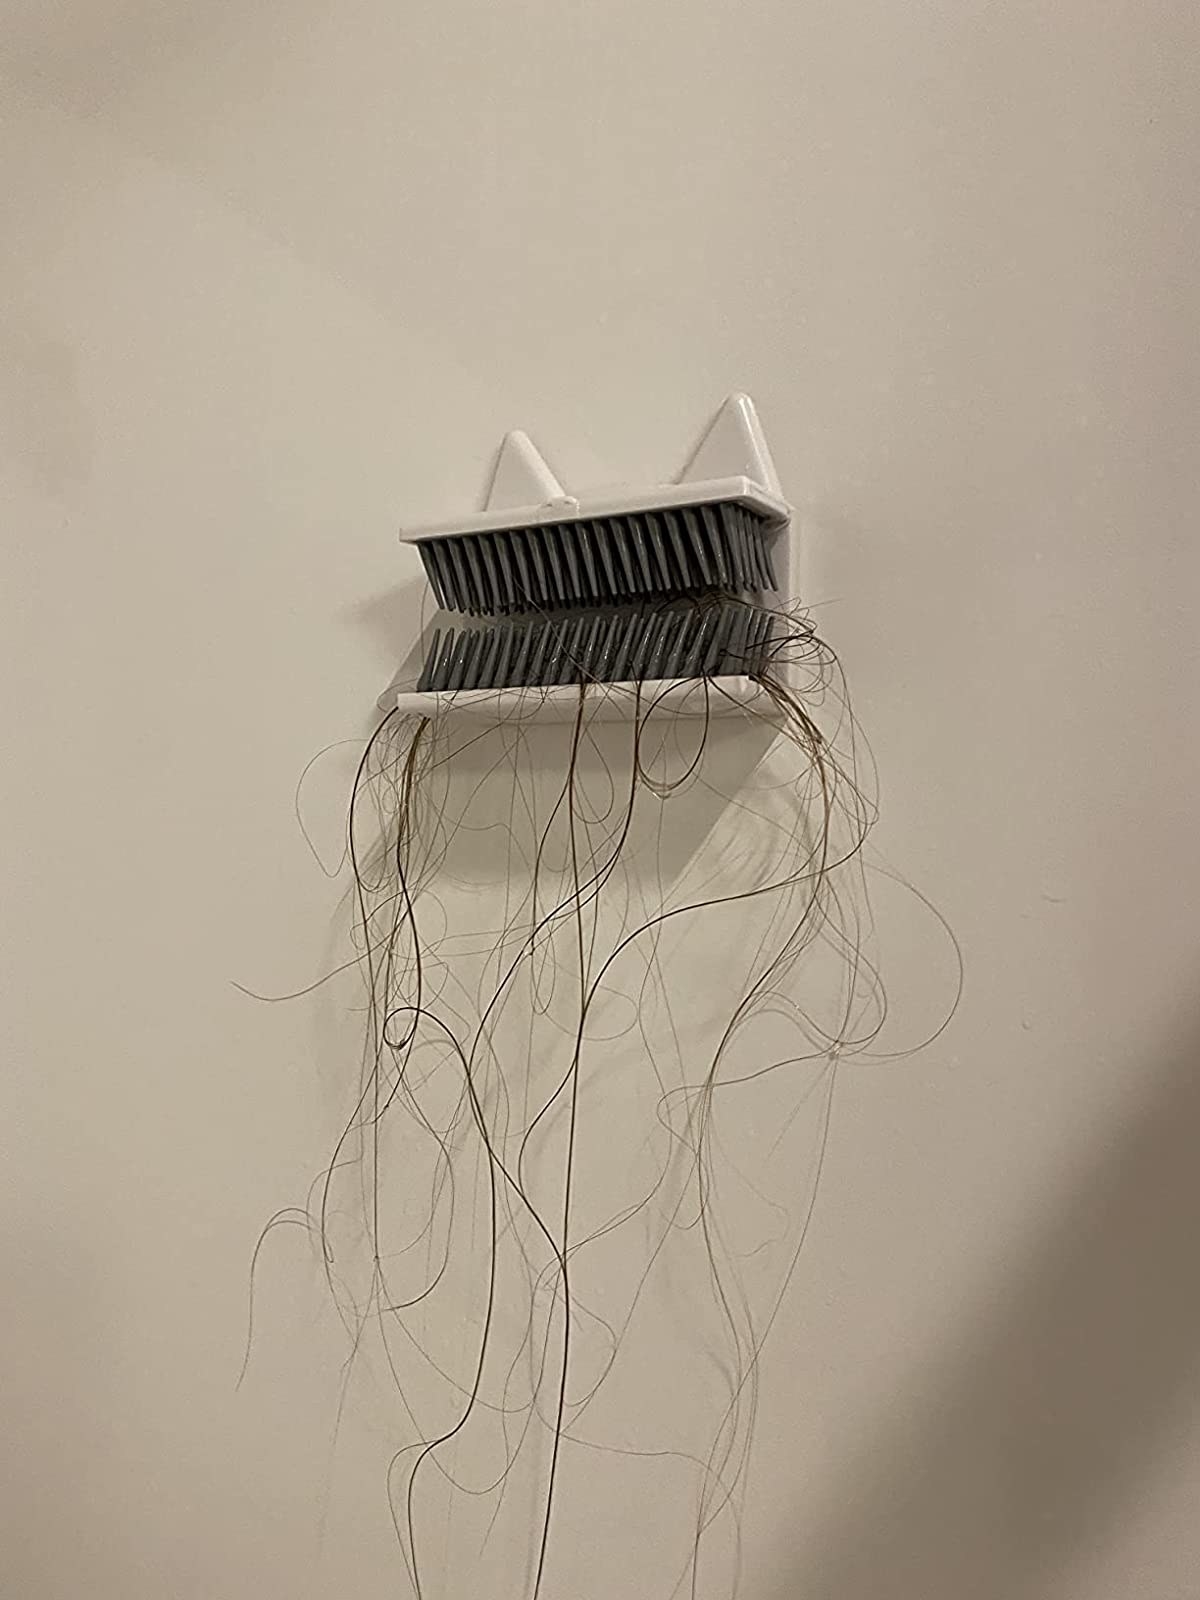 I just bought this hair catcher Prime Day deal because I hate unclogging my  shower drain